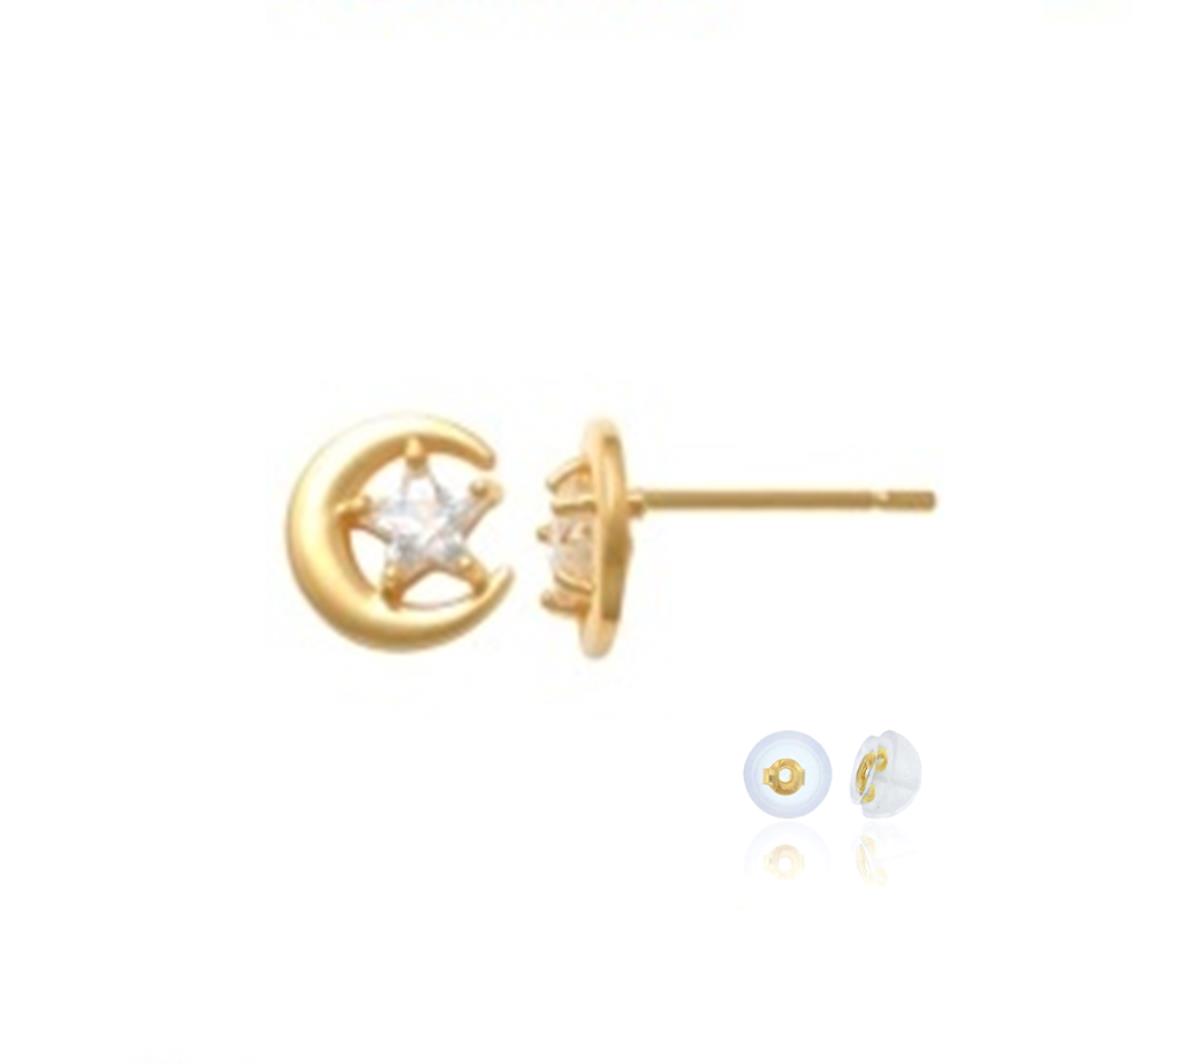 10K Yellow Gold 5mm Star CZ Crescent Moon Stud Earring with Silicone Back